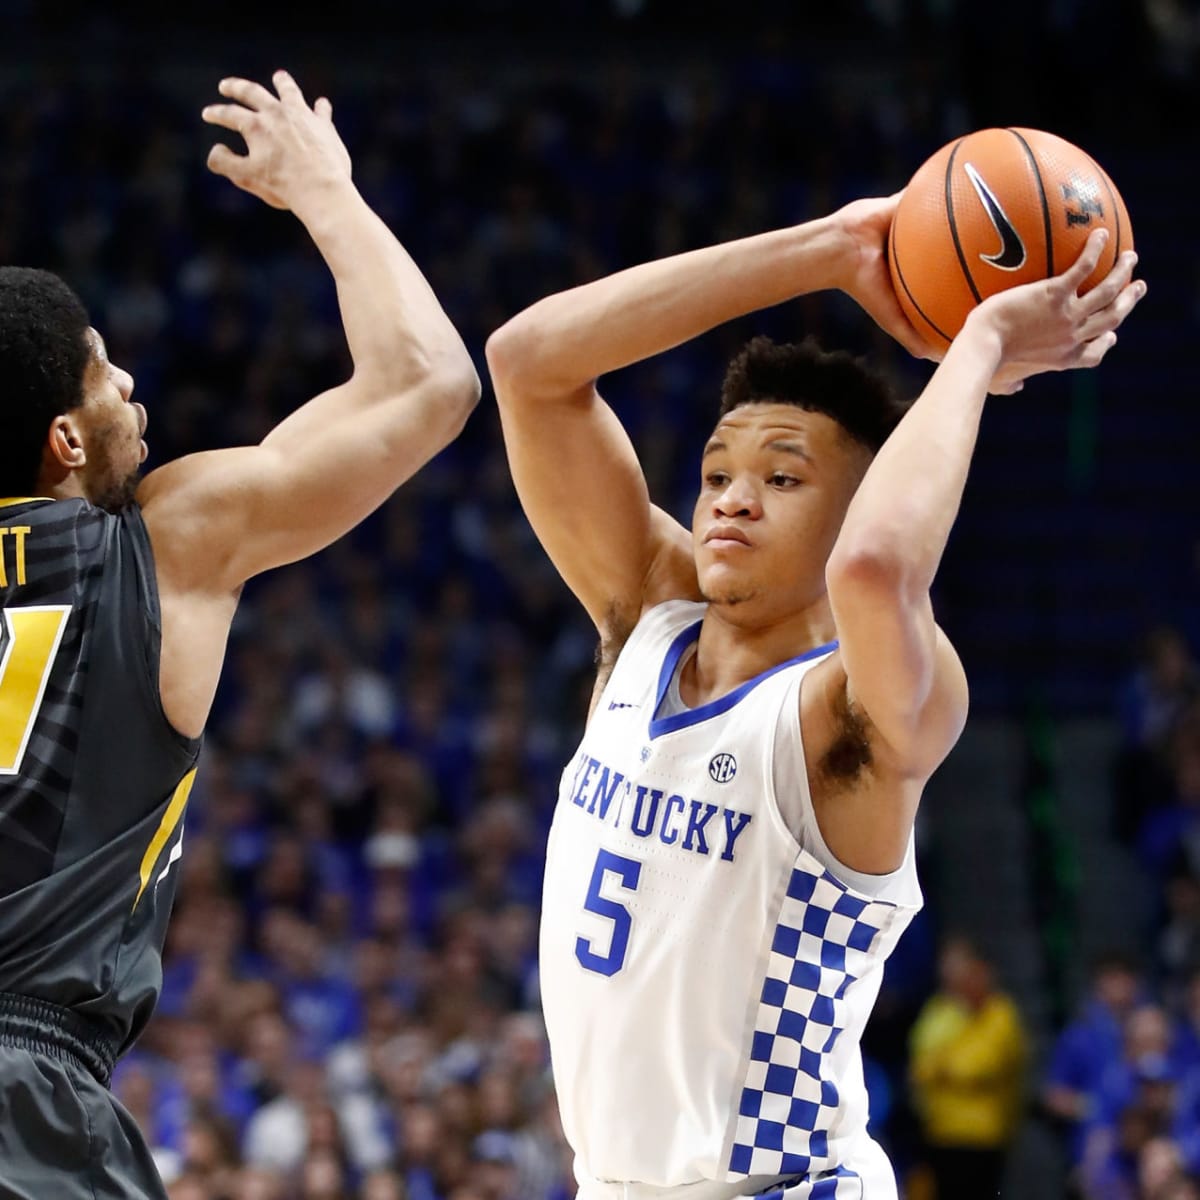 See what UK stars Shai Gilgeous-Alexander, Kevin Knox wore to NBA